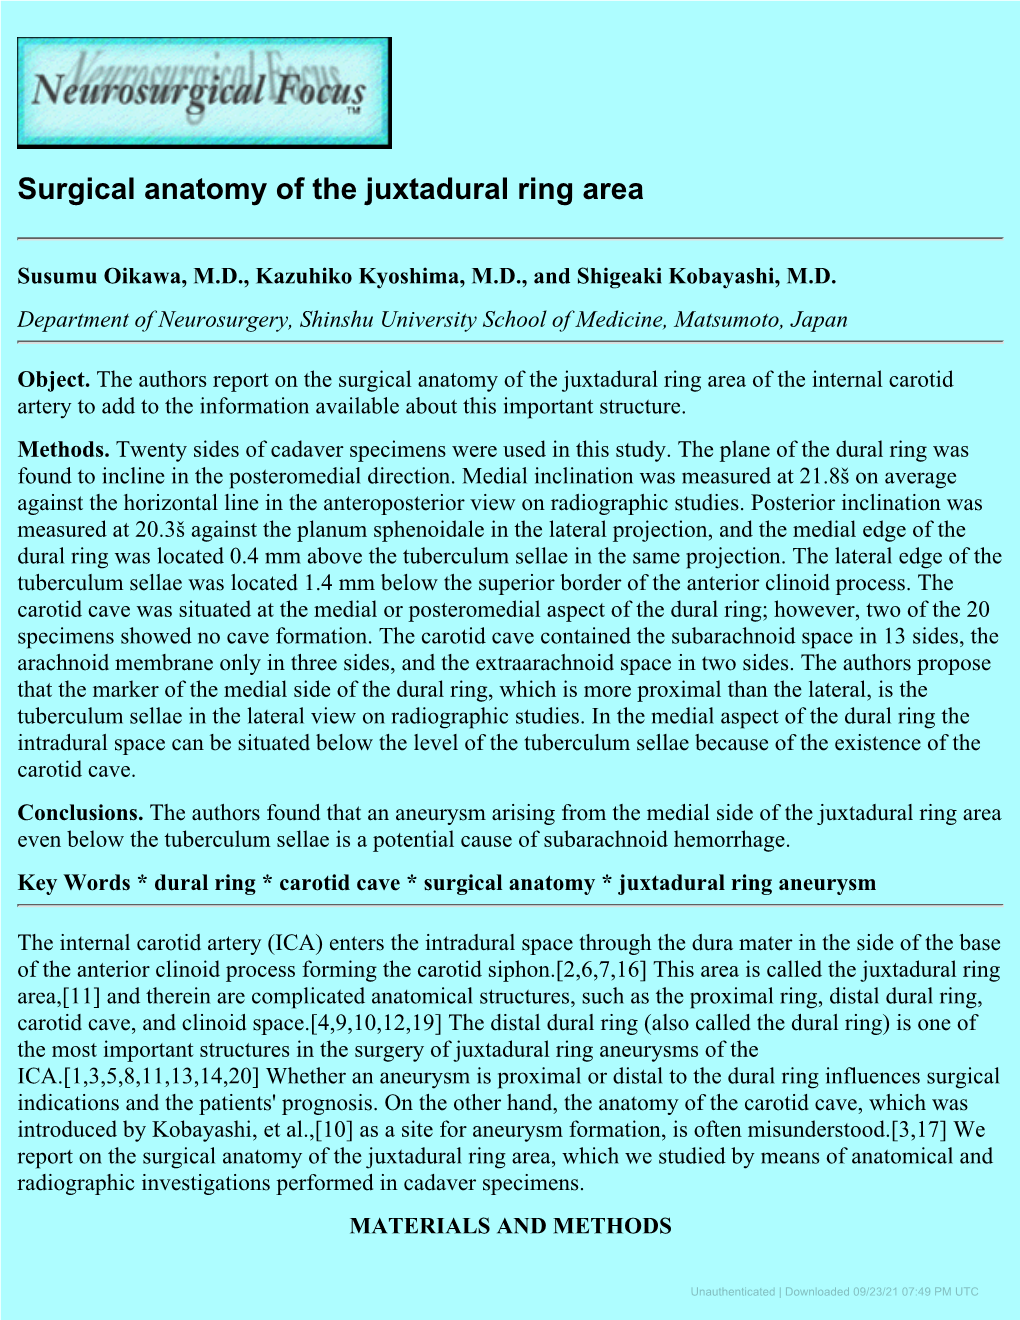 Surgical Anatomy of the Juxtadural Ring Area